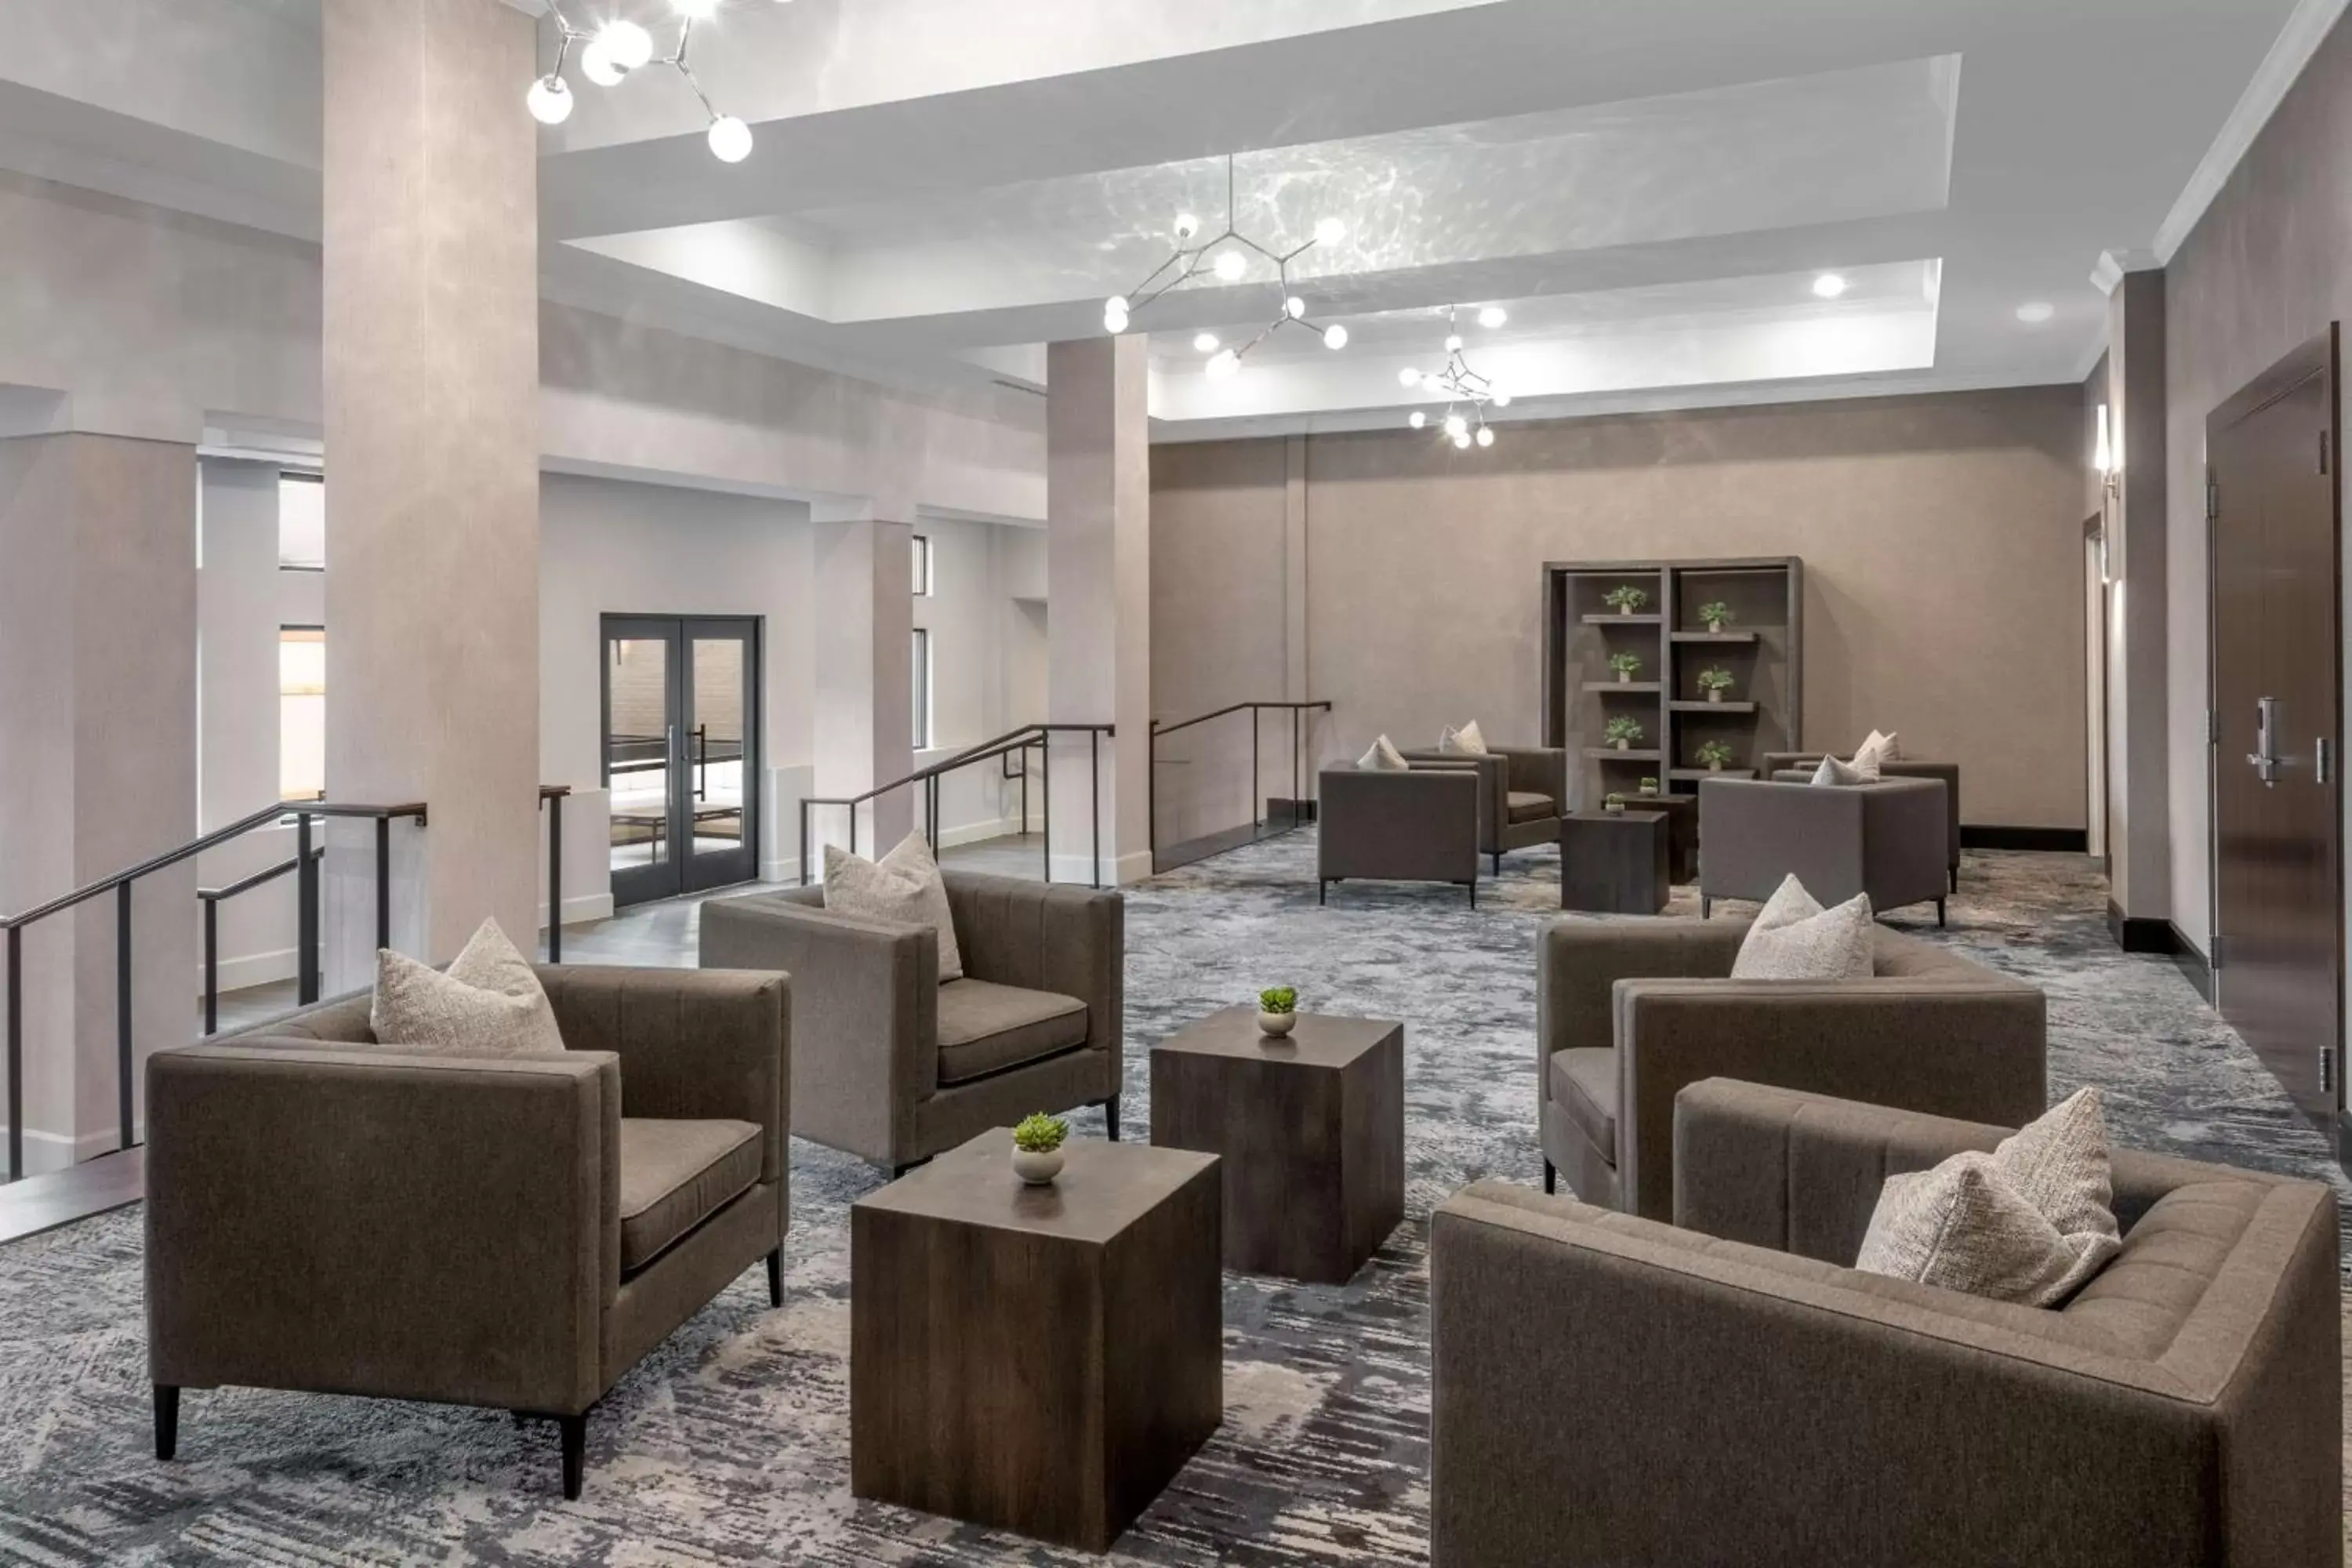 Meeting/conference room, Lounge/Bar in DoubleTree by Hilton Denver Cherry Creek, CO